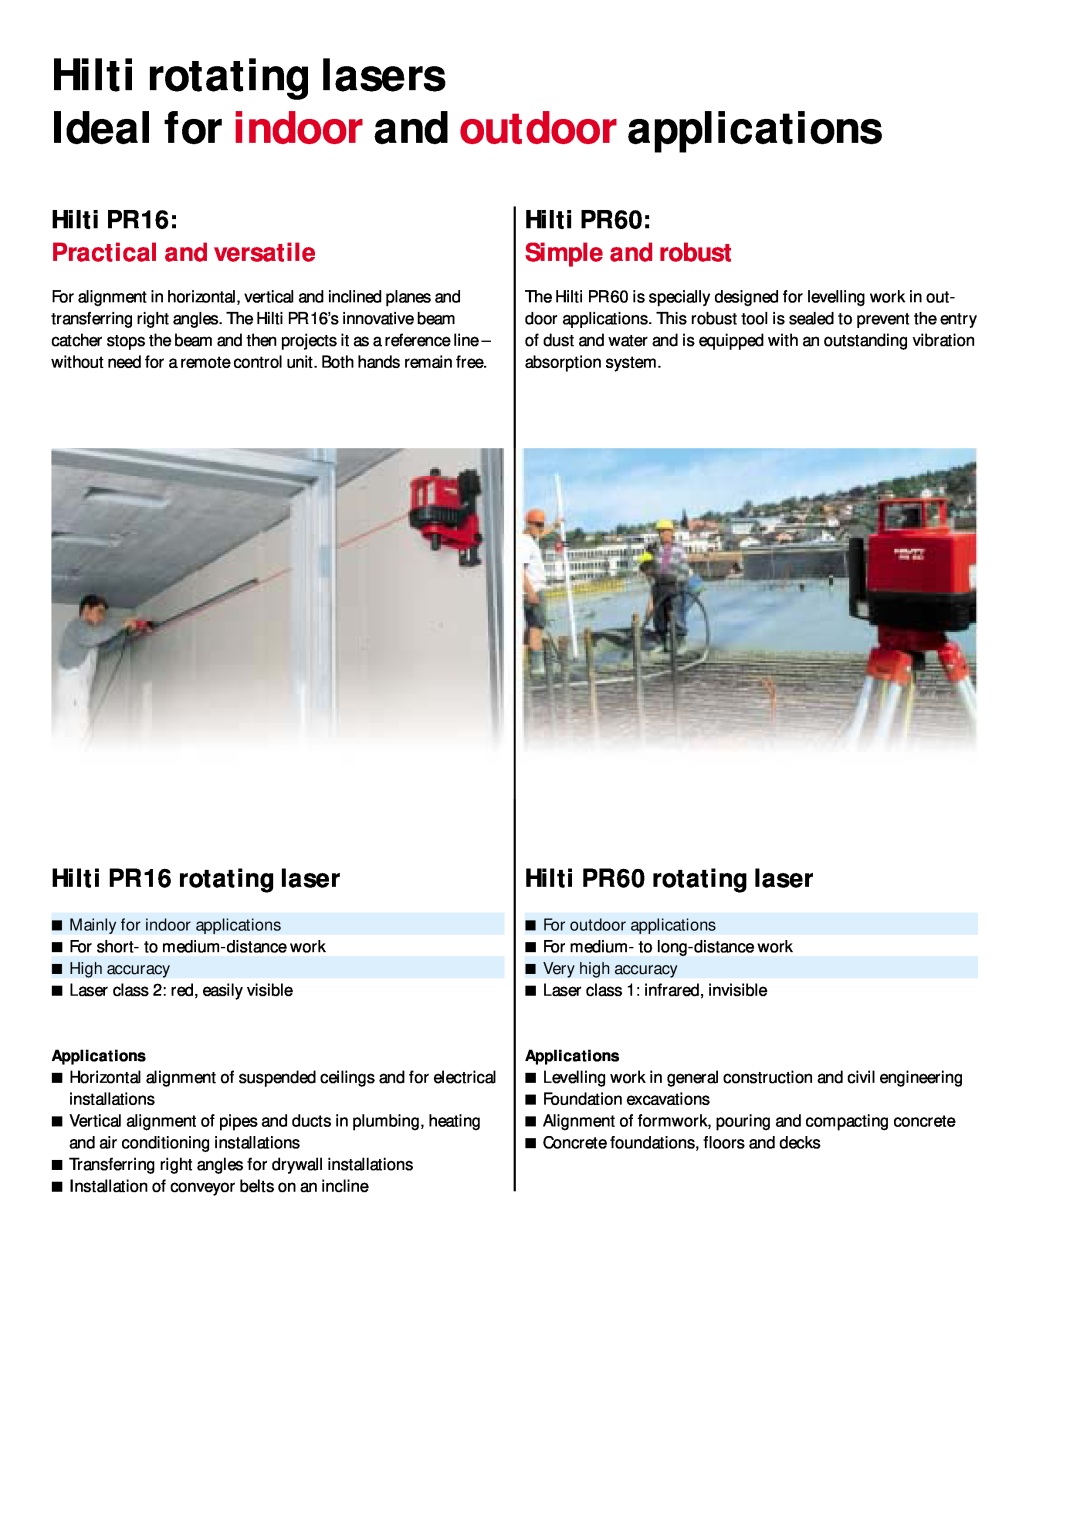 Hilti PR 16 manual Hilti rotating lasers Ideal for indoor and outdoor applications, Applications, Hilti PR16, Hilti PR60 